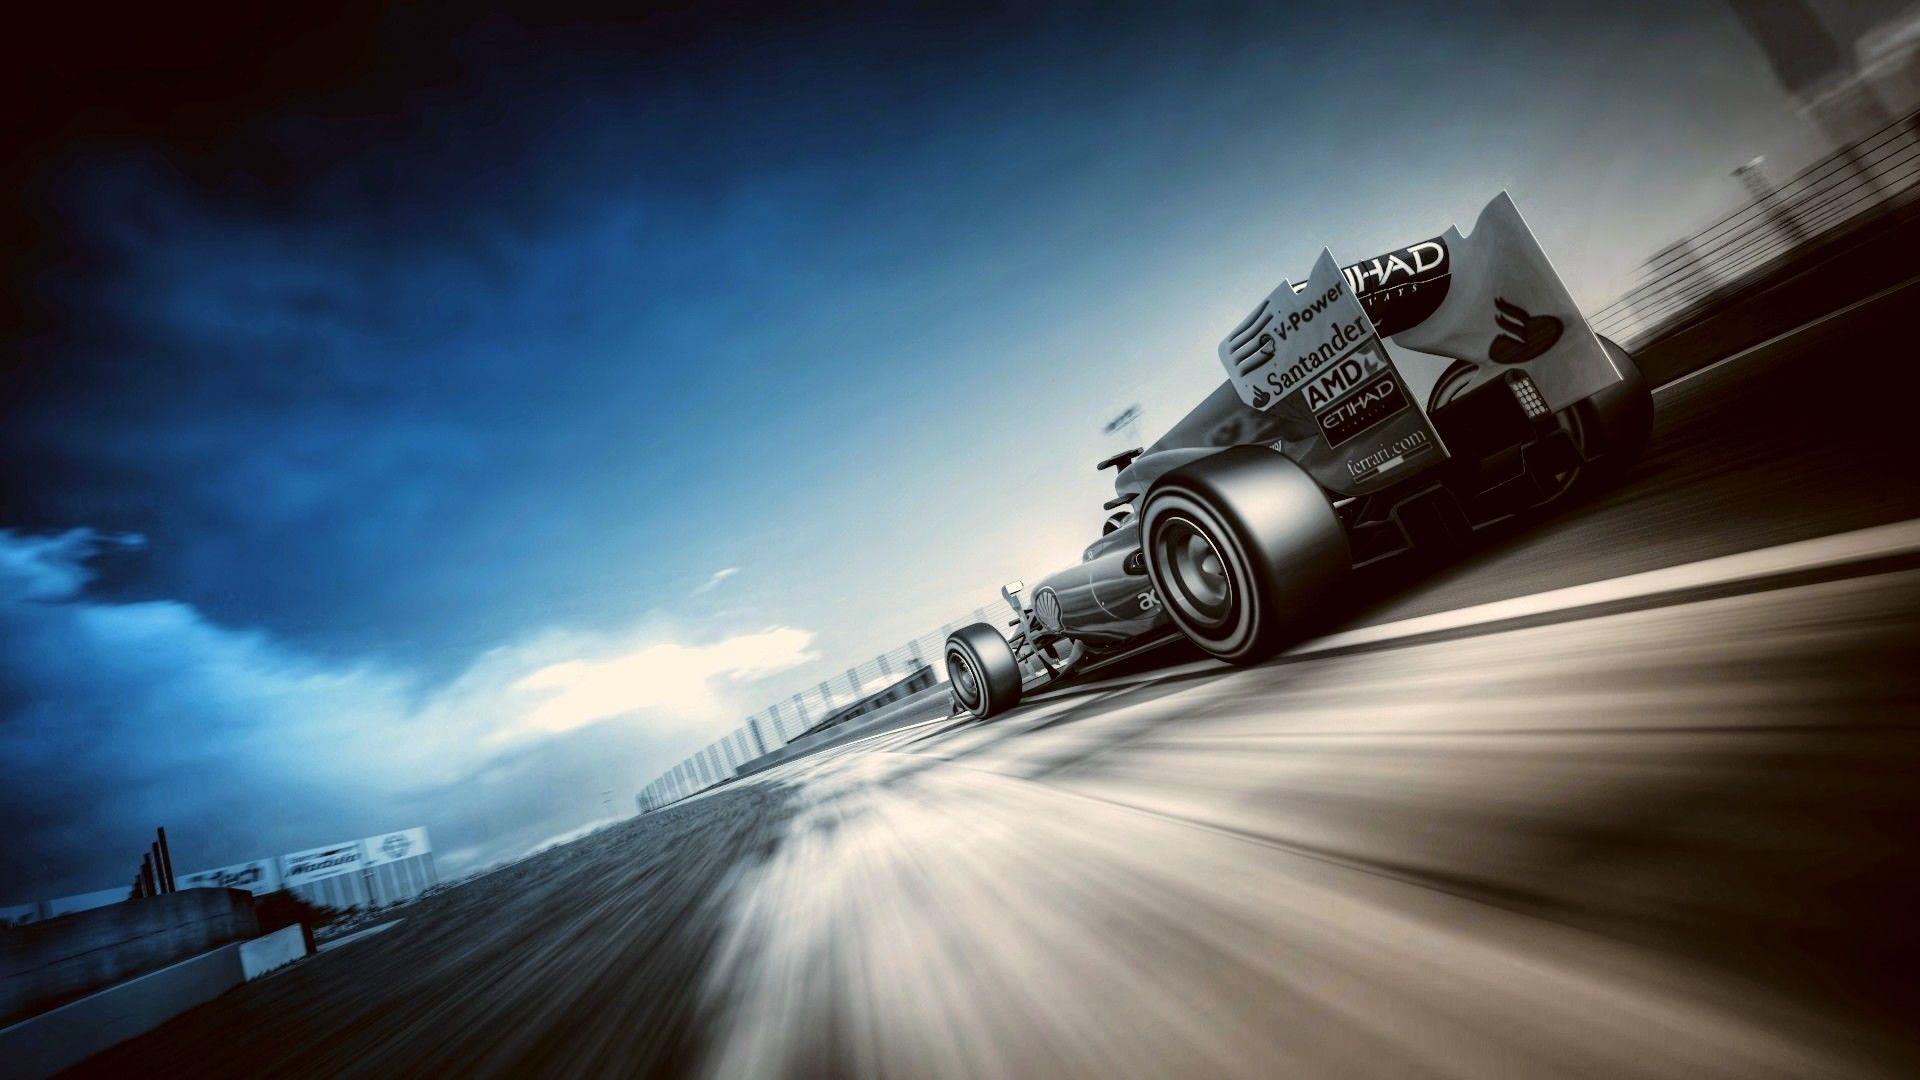 Over 50 Formula One Cars F1 Wallpaper in HD For Free Download